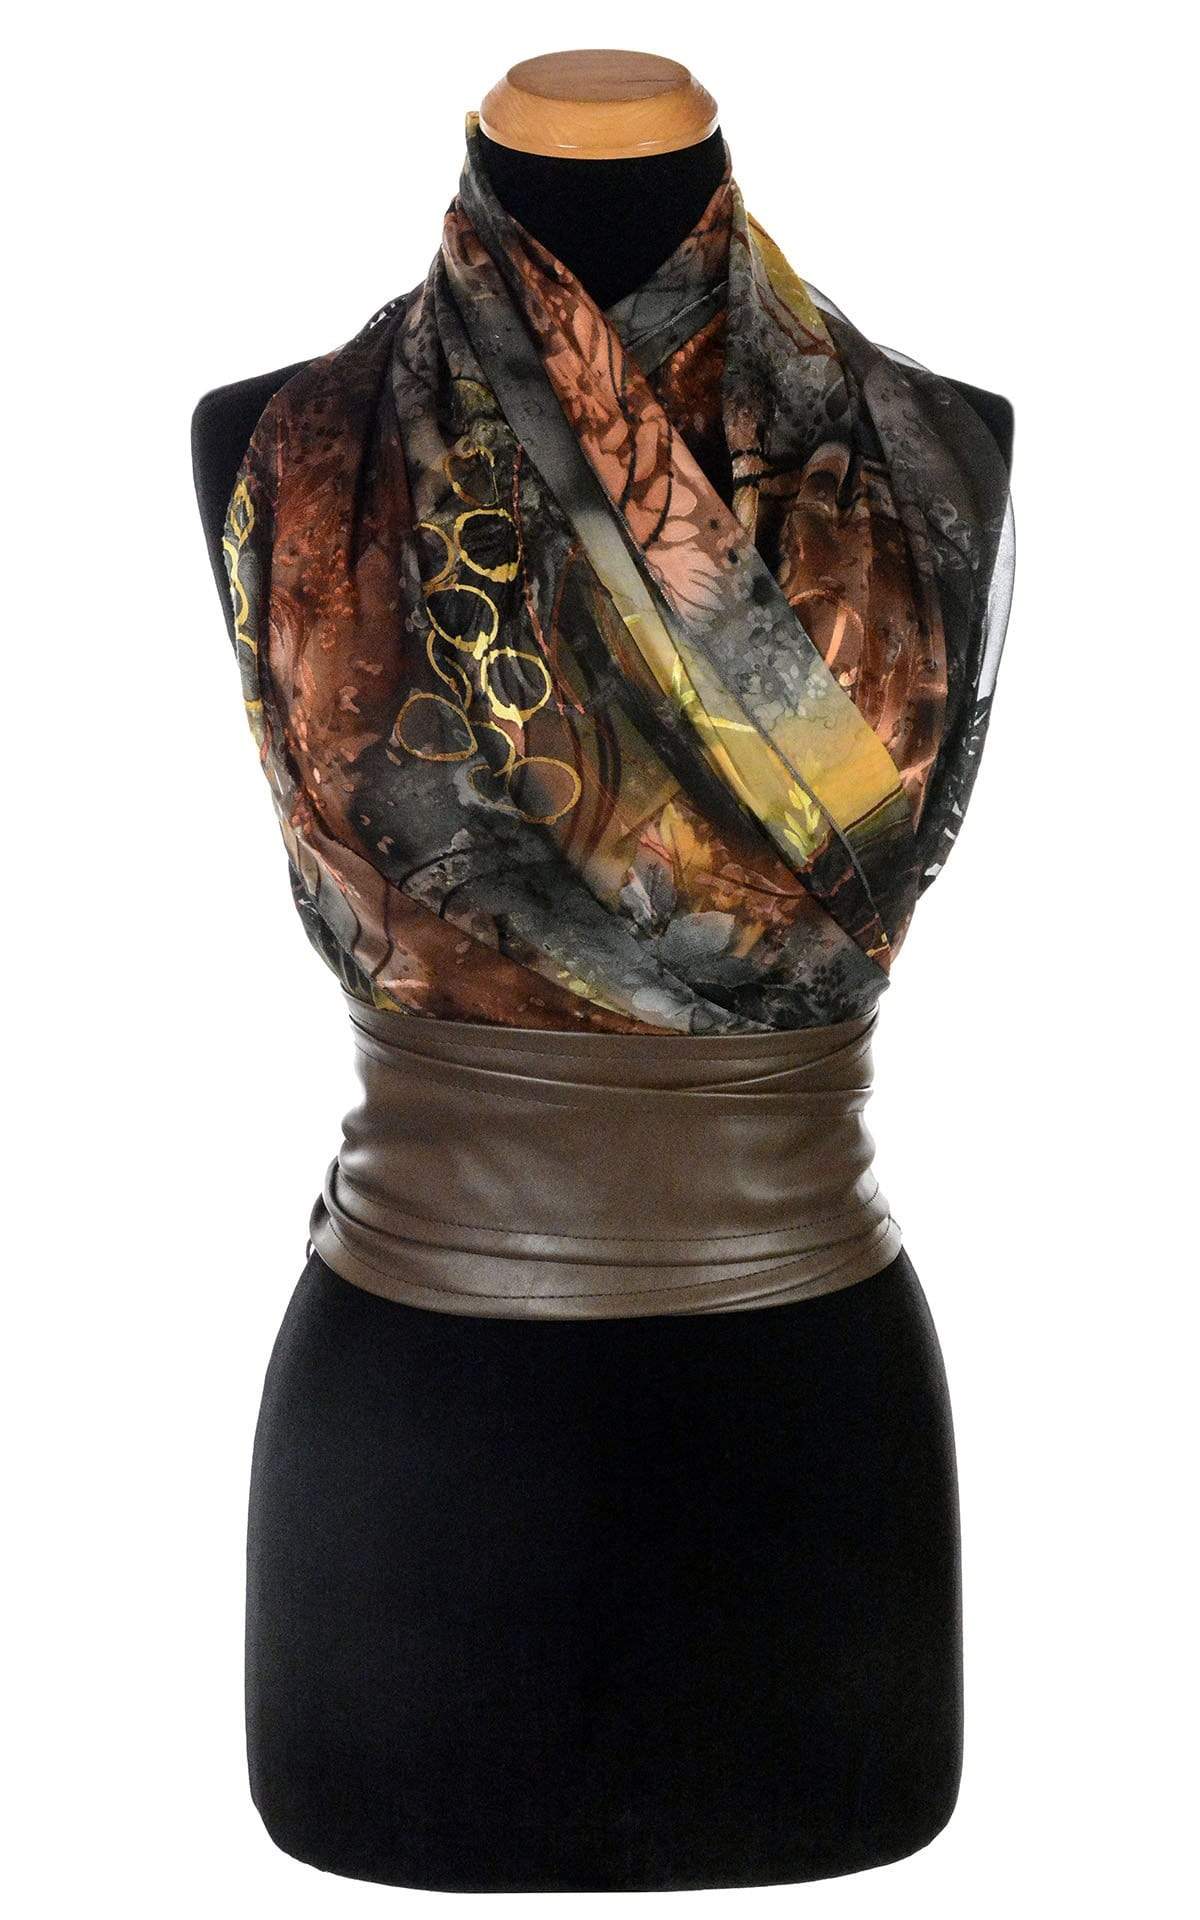 Women’s Large Handkerchief Scarf, Wrap in hand-painted silk on a mannequin with Obi Belt wrapped around it | Garden Path in Tiger Lily black, green, rust, yellow, and Gray | Handmade in Seattle WA | Pandemonium Millinery